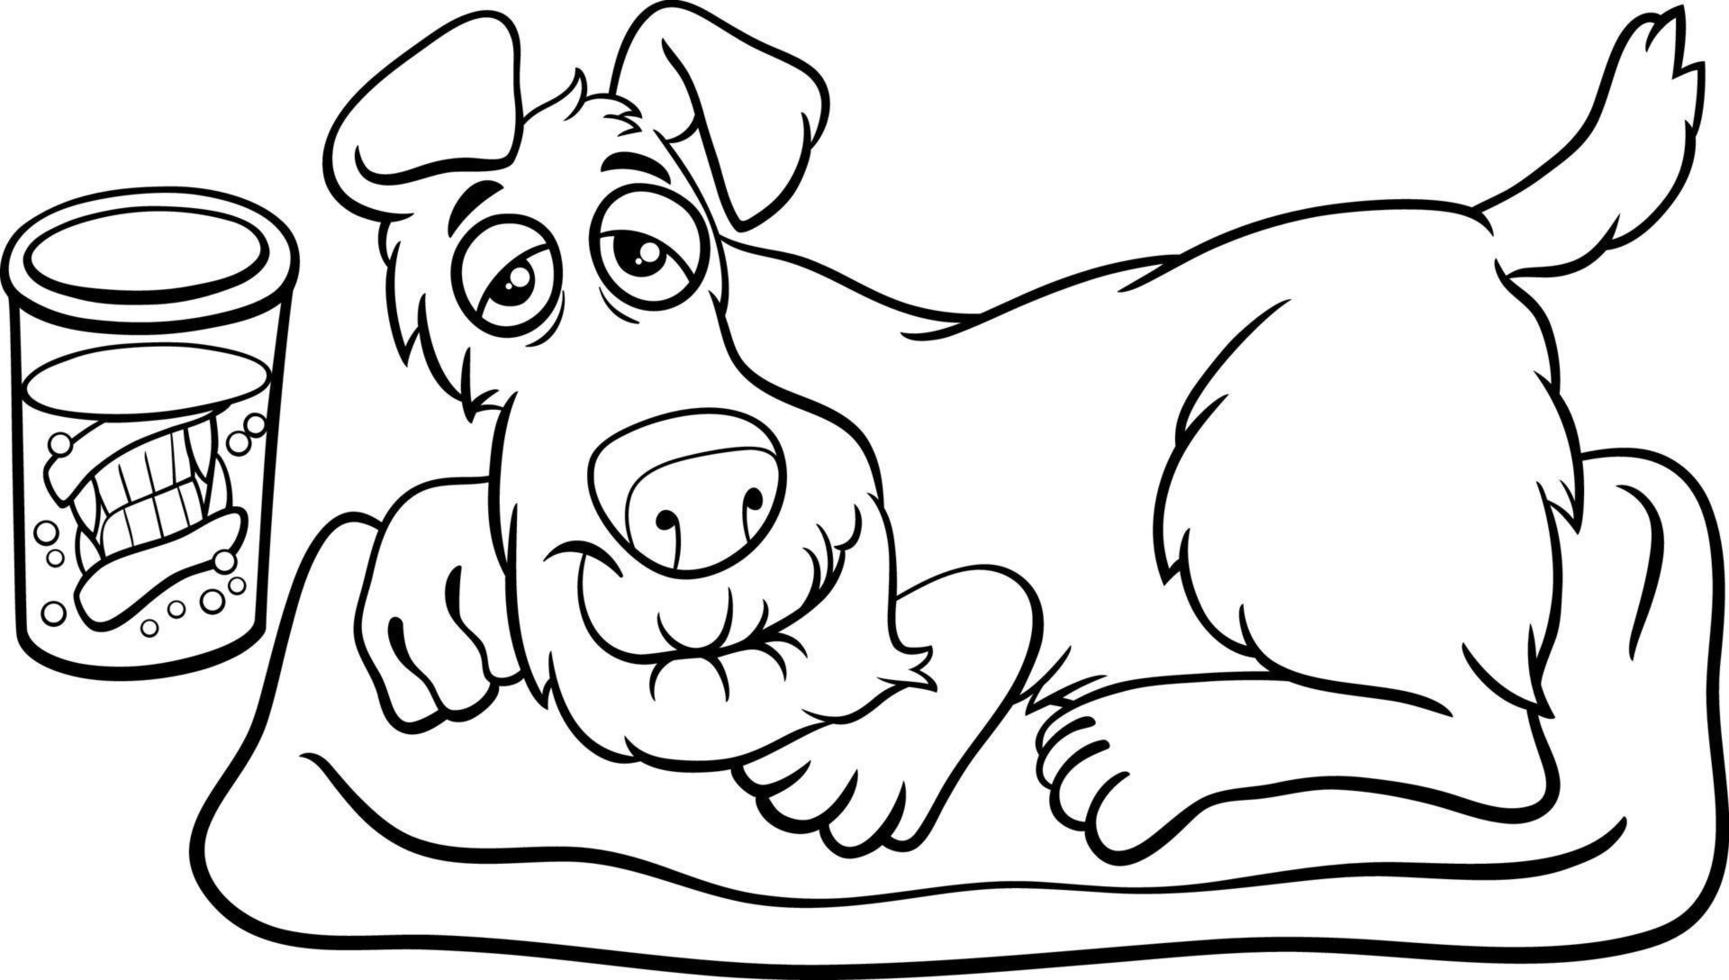 cartoon senior dog with dentures in a glass coloring page vector